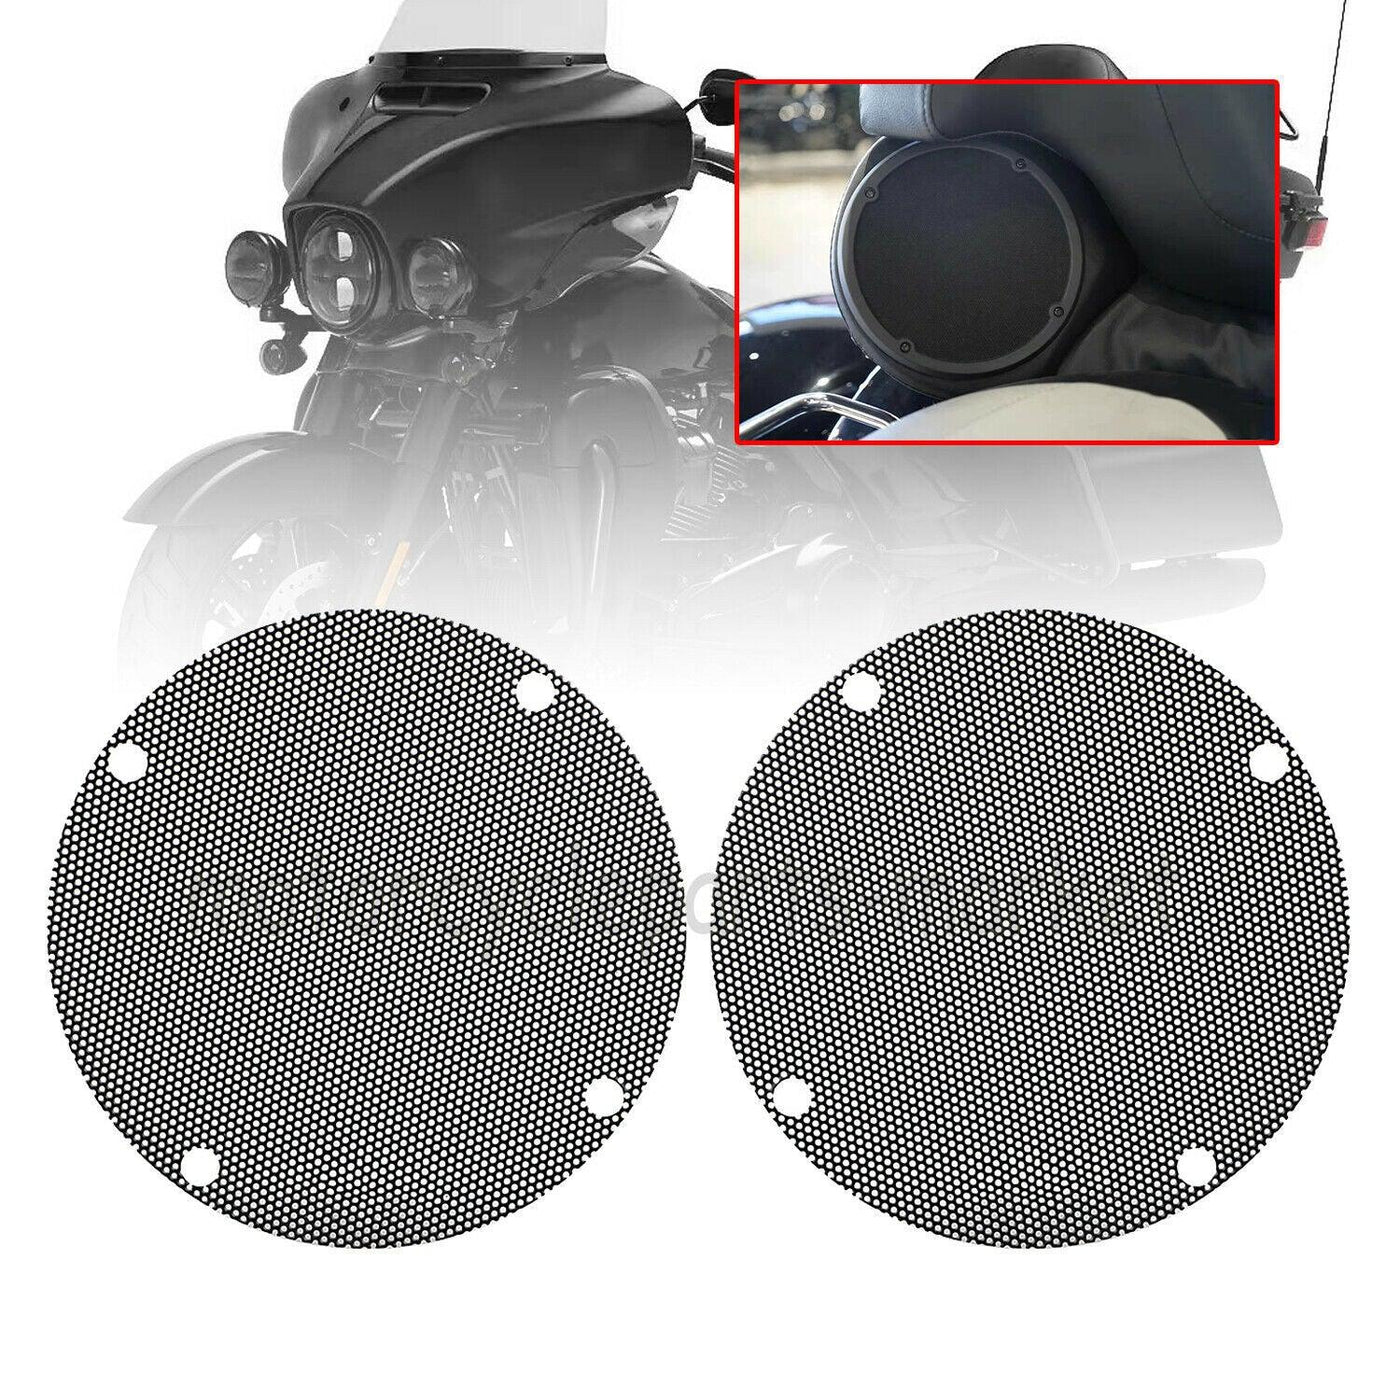 Motorcycle Black Mesh Rear Speaker Grill Covers For Harley Touring Electra Glide - Moto Life Products